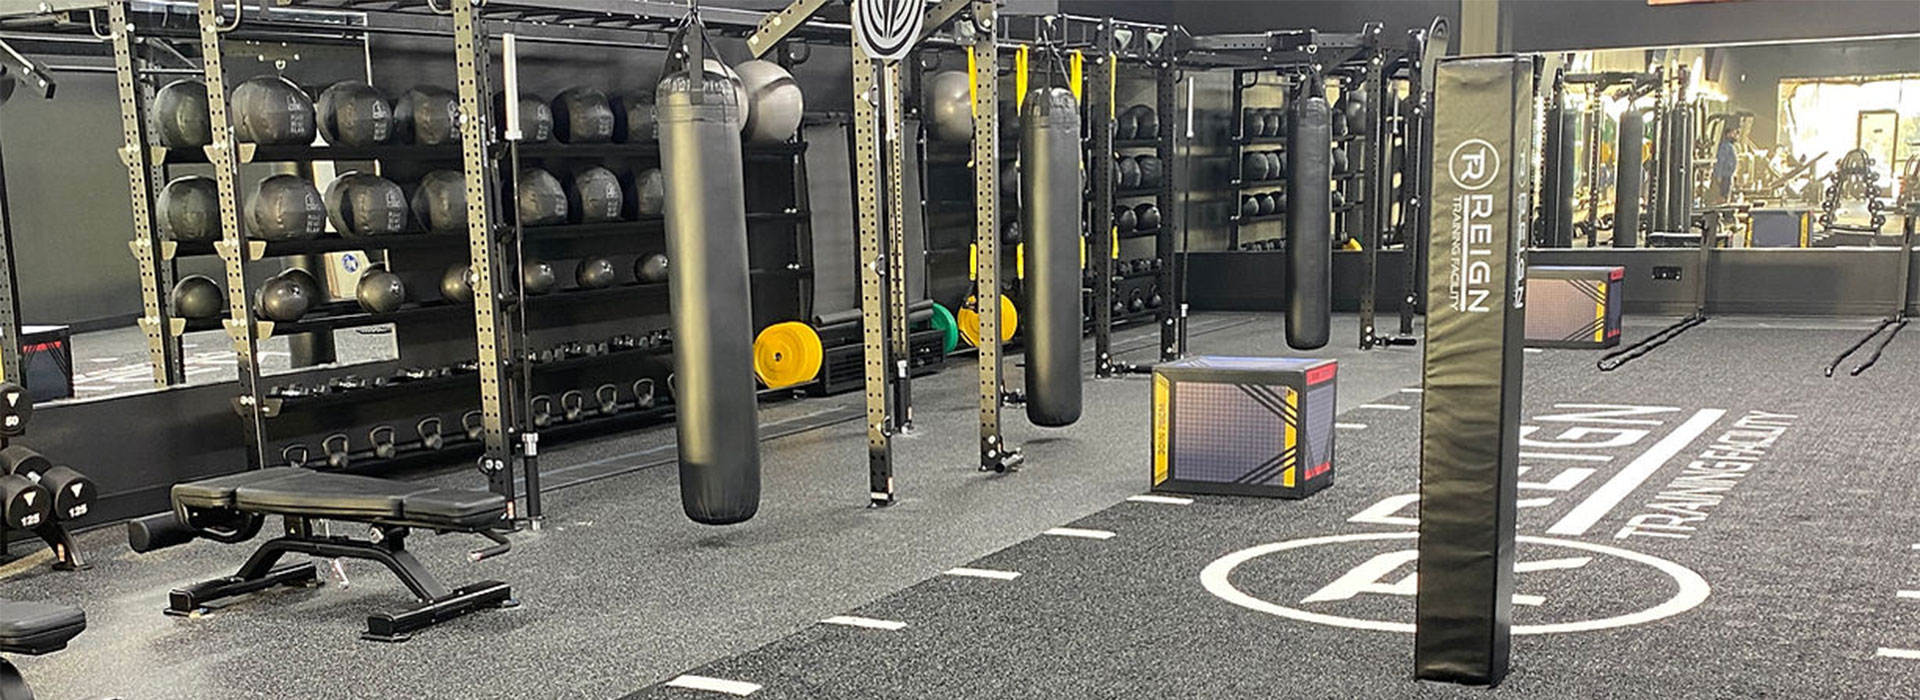 A Gym Near Riverside That Can Help With Strength Training and Weight Loss